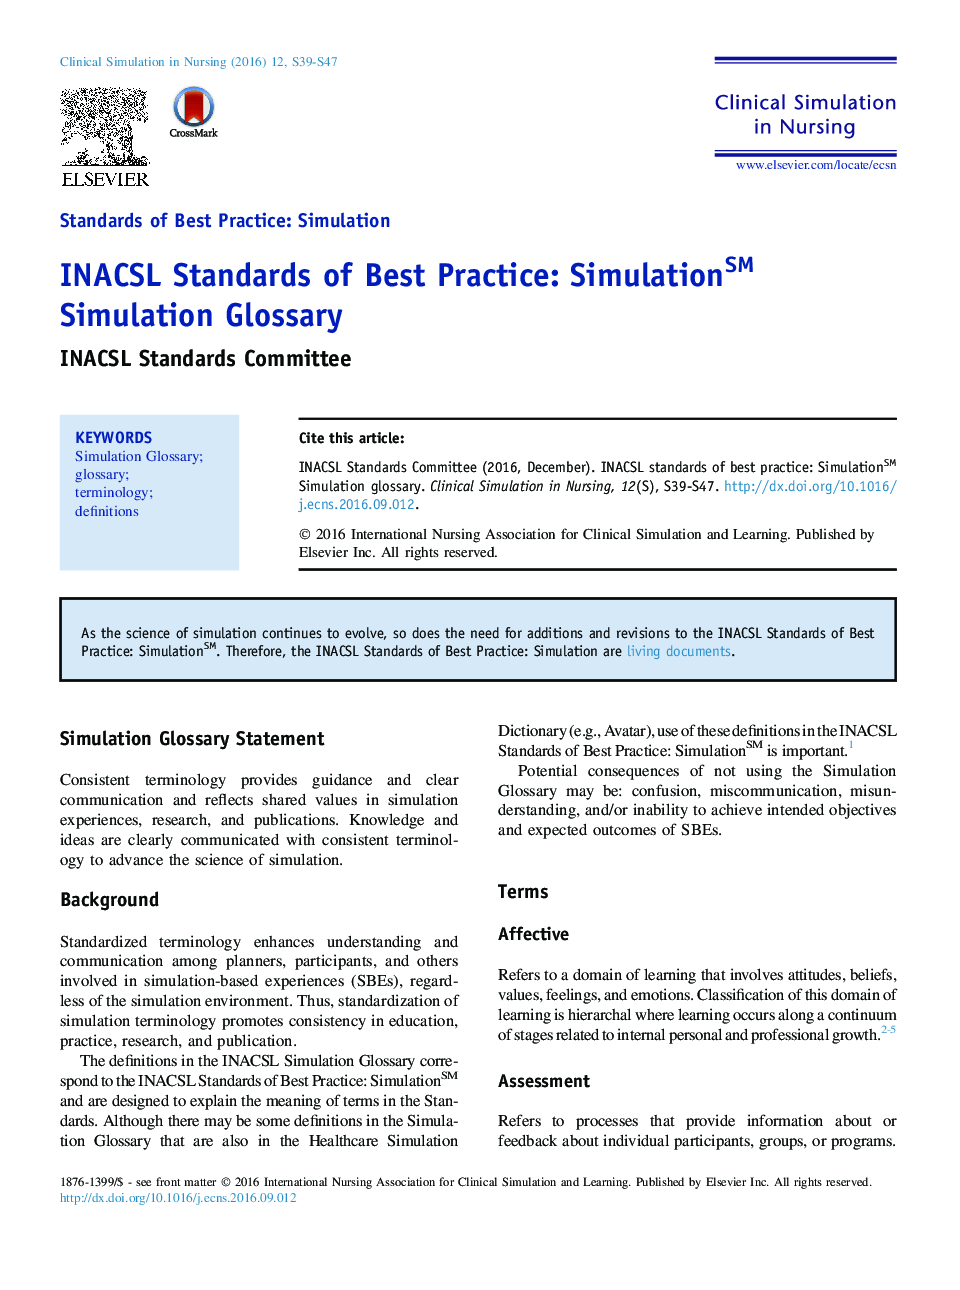 INACSL Standards of Best Practice: SimulationSM Simulation Glossary